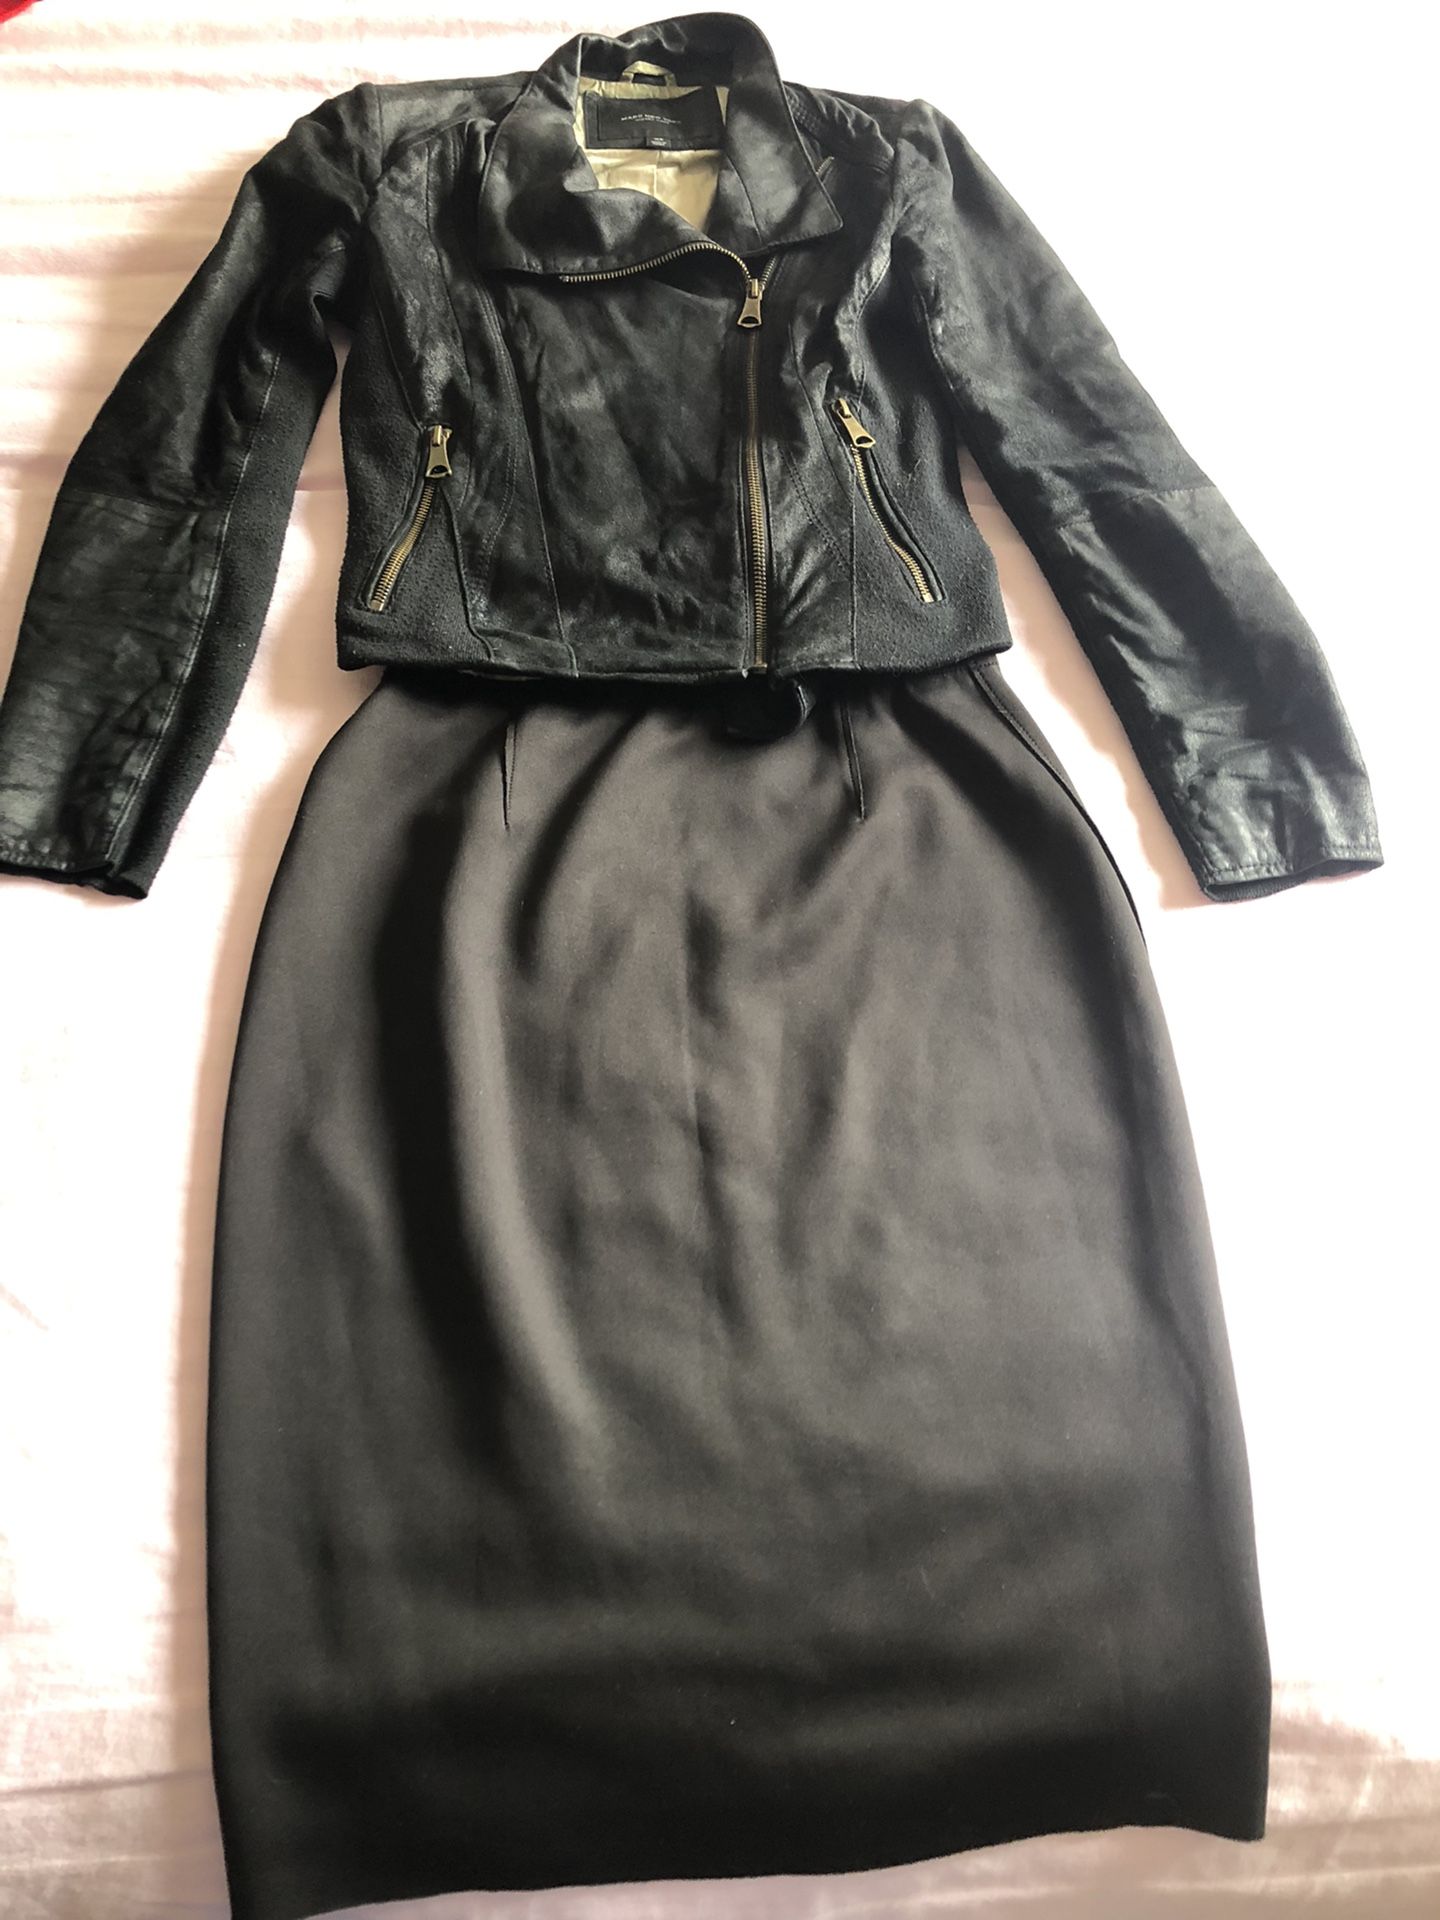 clothes for a girl, size S, M, jacket, skirt, leggings, shorts, sweater, t-shirt, all for $20!